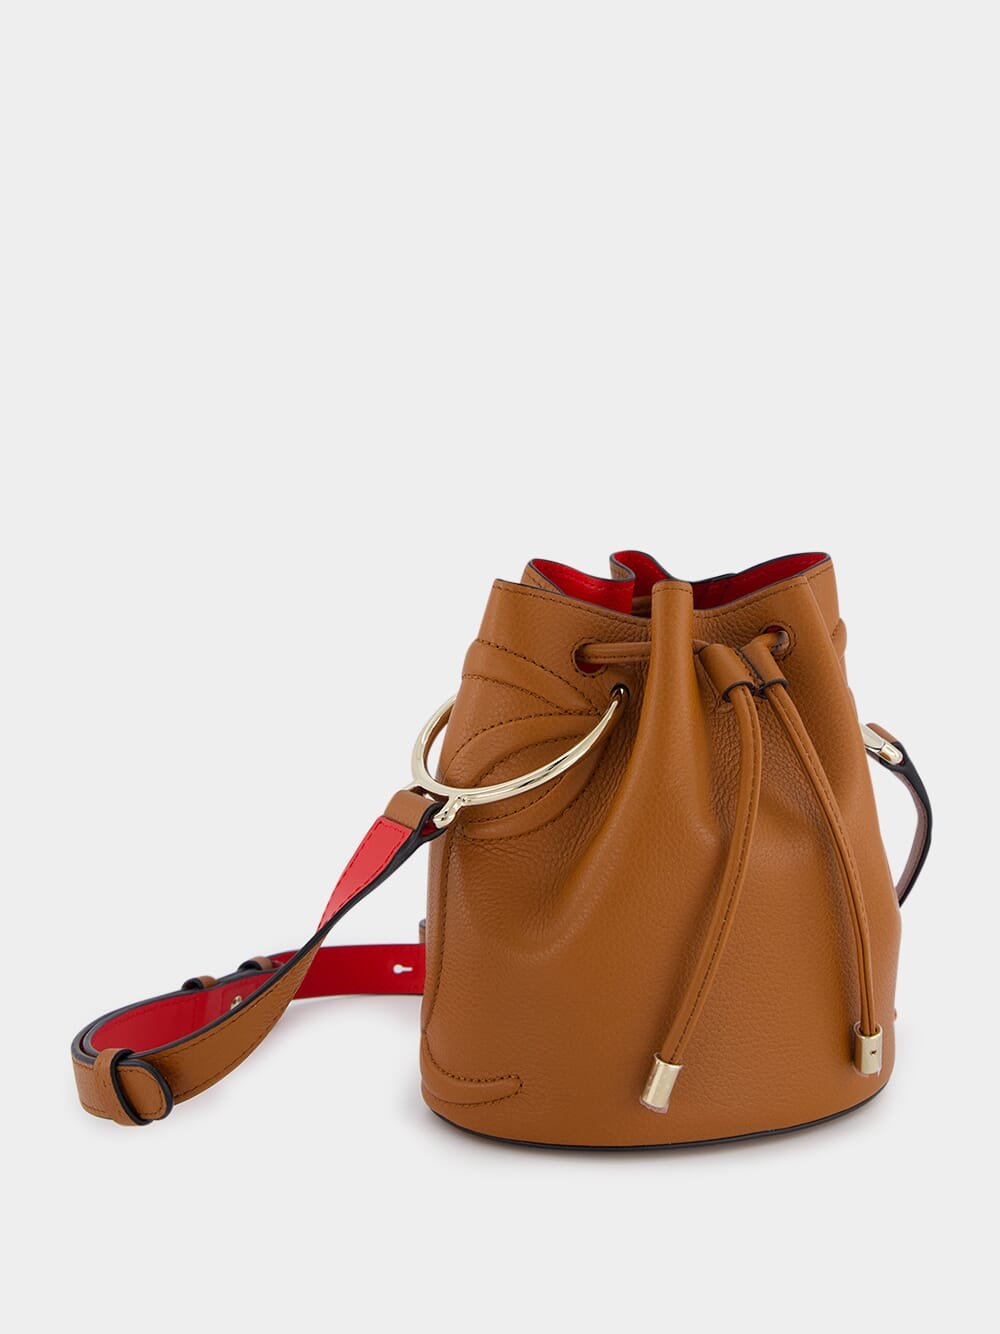 Christian LouboutinBy My Side Bucket Bag at Fashion Clinic